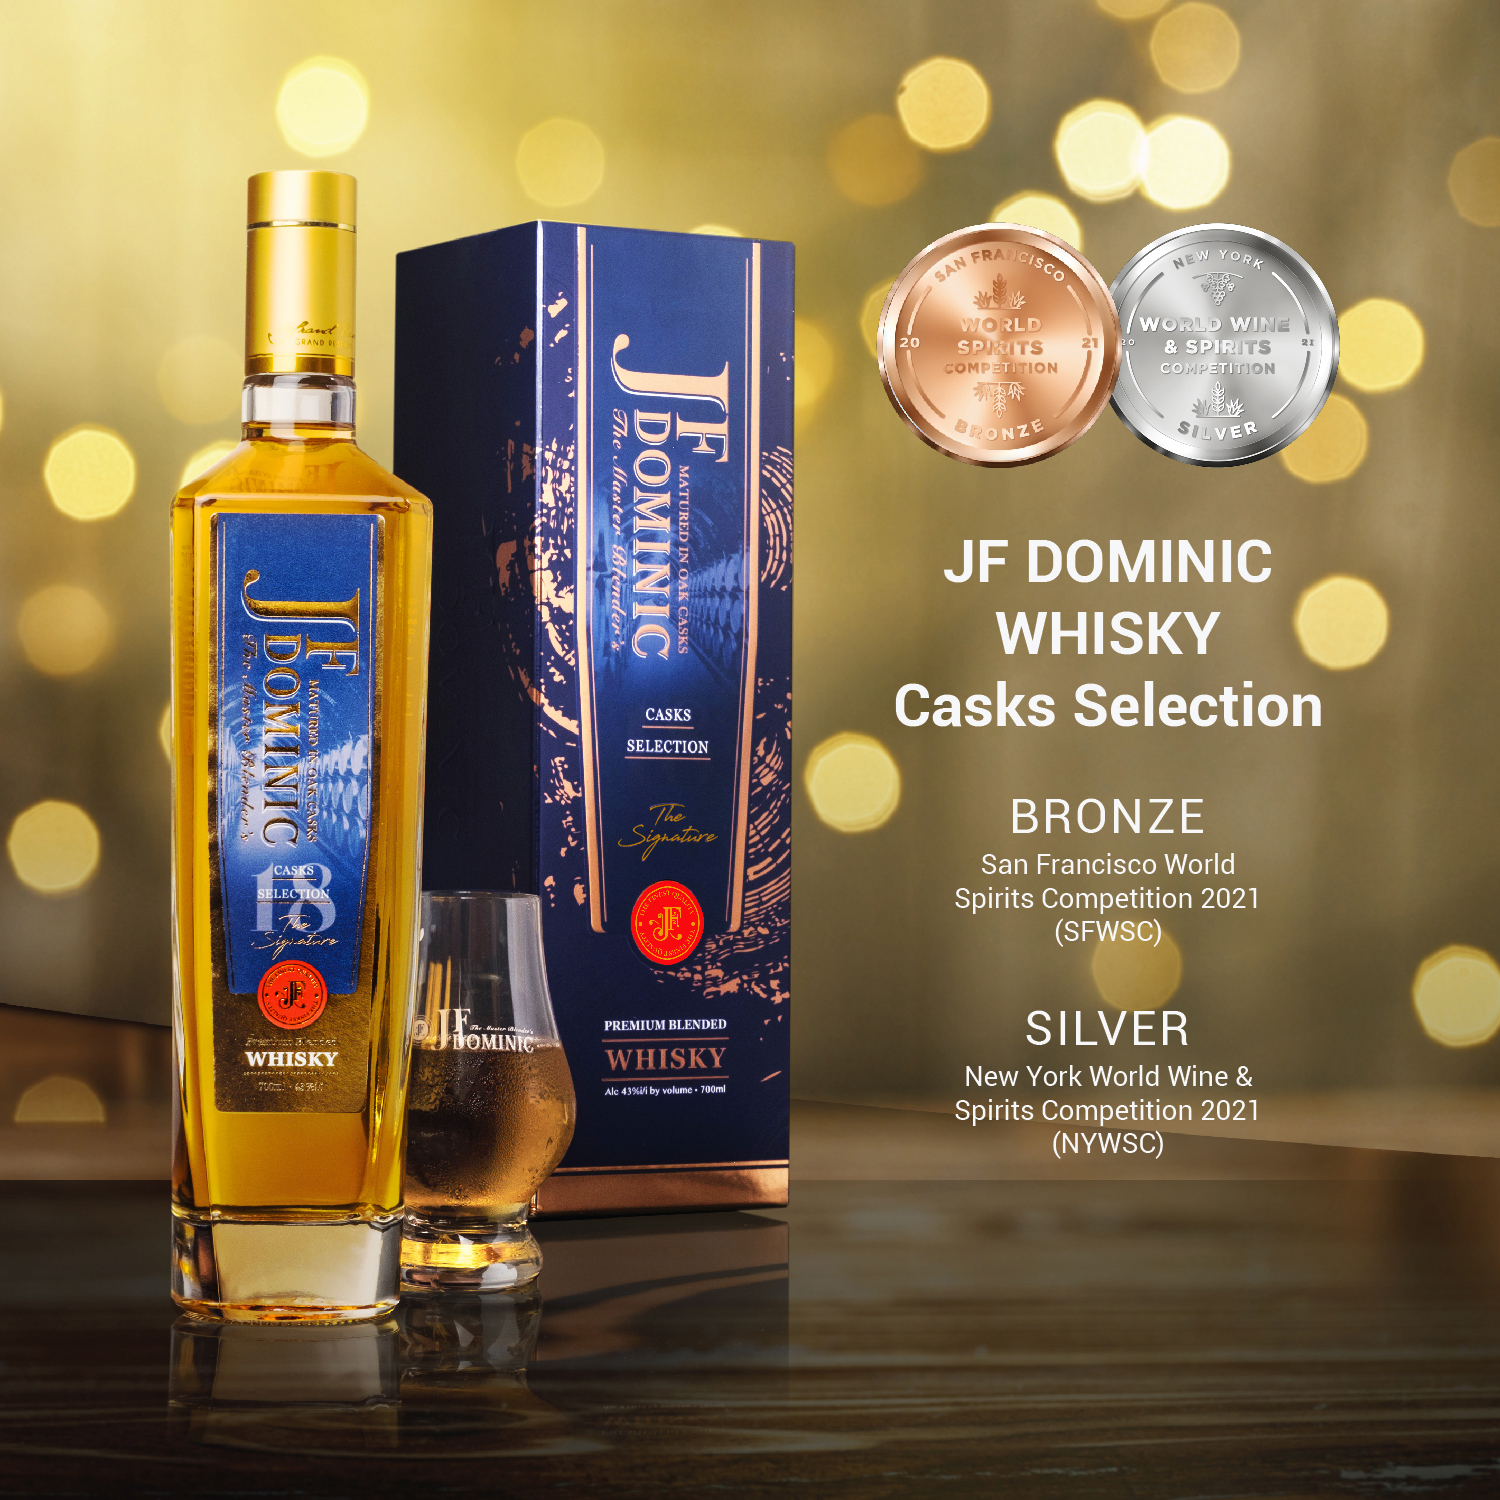 JF Dominic Whisky - Casks Selection